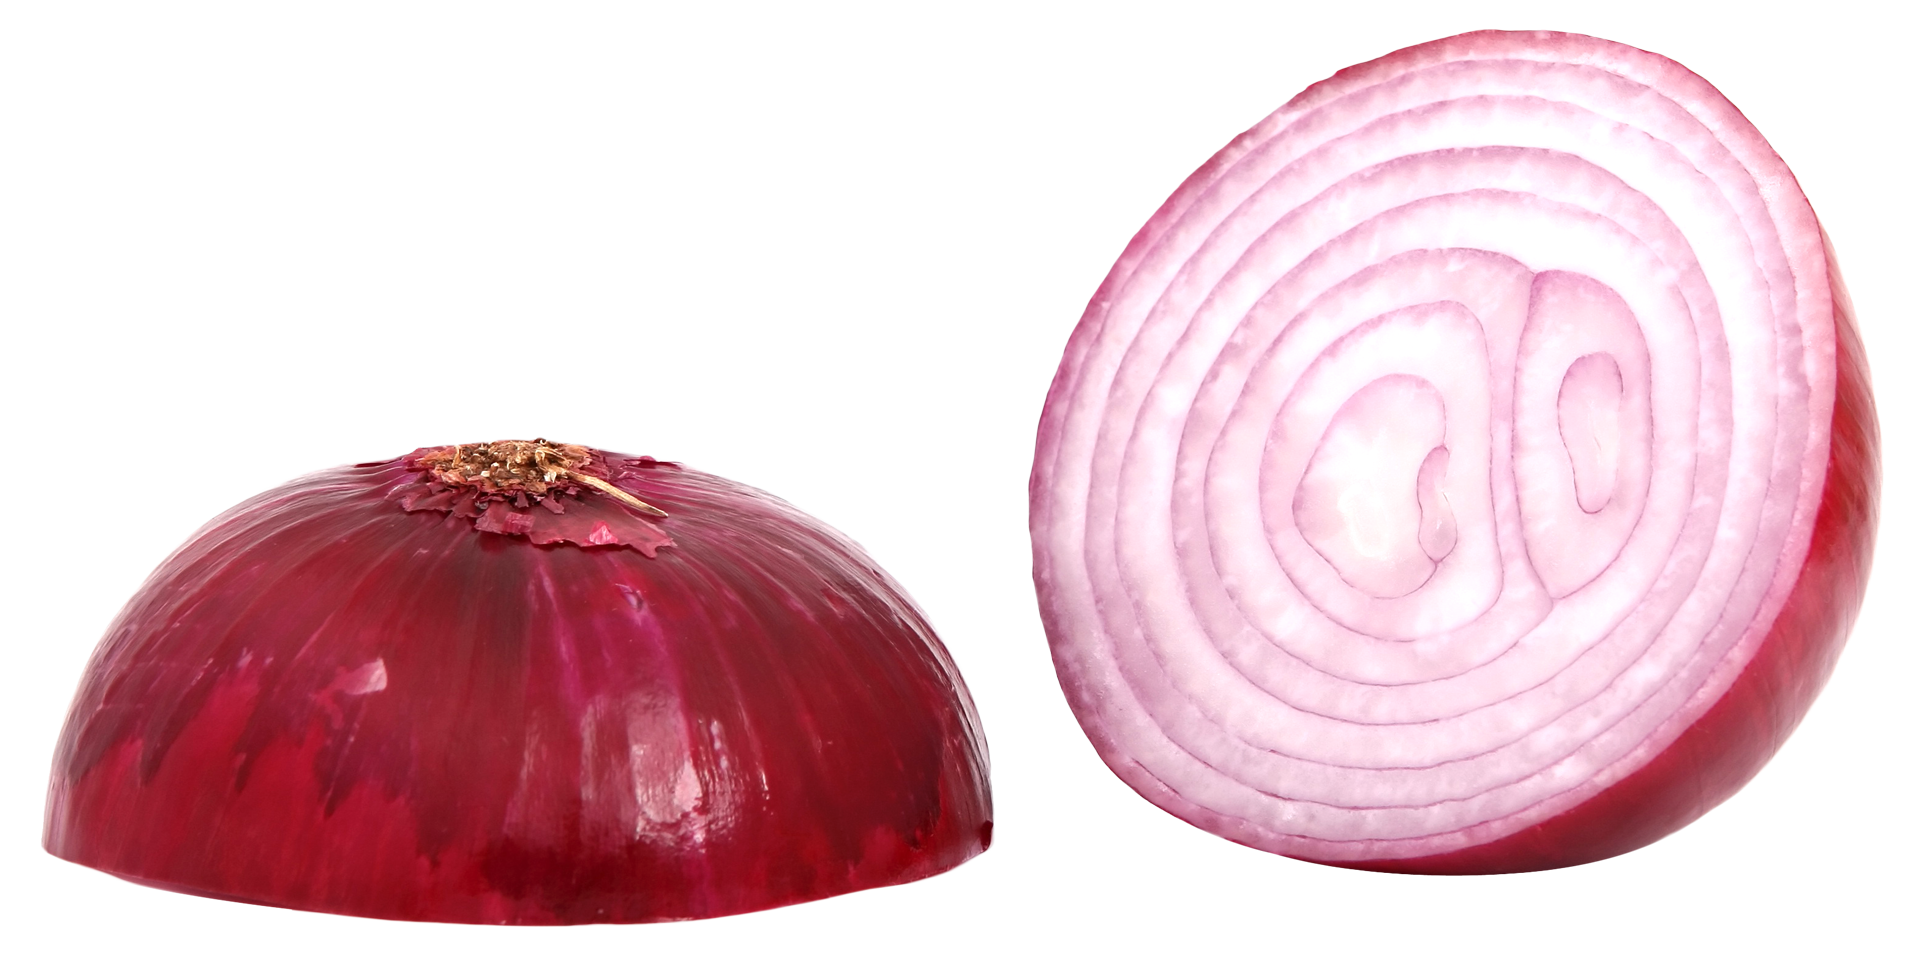 Slice Onion Download Free Image PNG Image